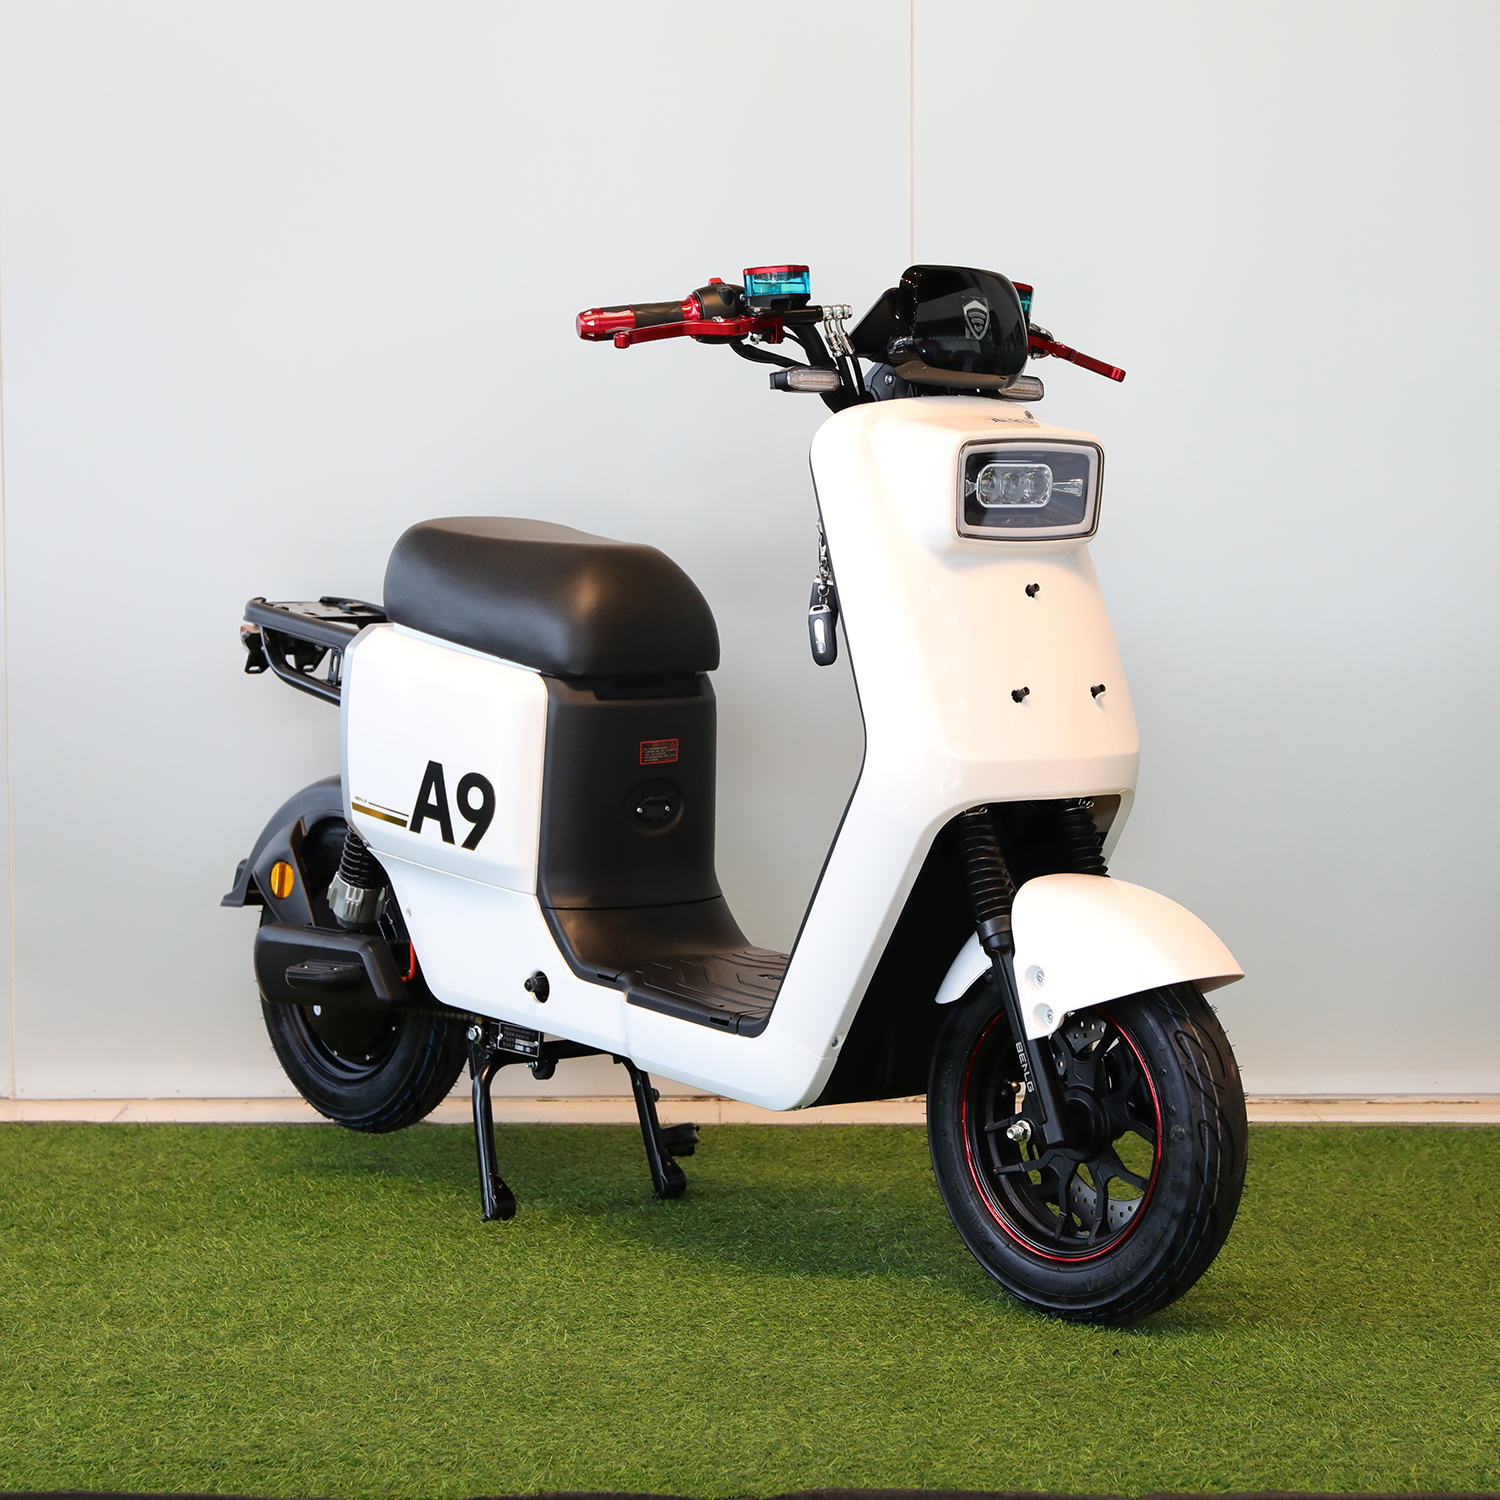 Supply Benlg A9 electric motorcycle 2 wheel electromobile cycling vehicle for sale 1000W 1500W motor 48V lithium 2023 China hot selling for wholesale, Benlg A9 electric motorcycle 2 wheel electromobile cycling vehicle for sale 1000W 1500W motor 48V lithium 2023 China hot selling for wholesale Factory Quotes, Benlg A9 electric motorcycle 2 wheel electromobile cycling vehicle for sale 1000W 1500W motor 48V lithium 2023 China hot selling for wholesale Producers